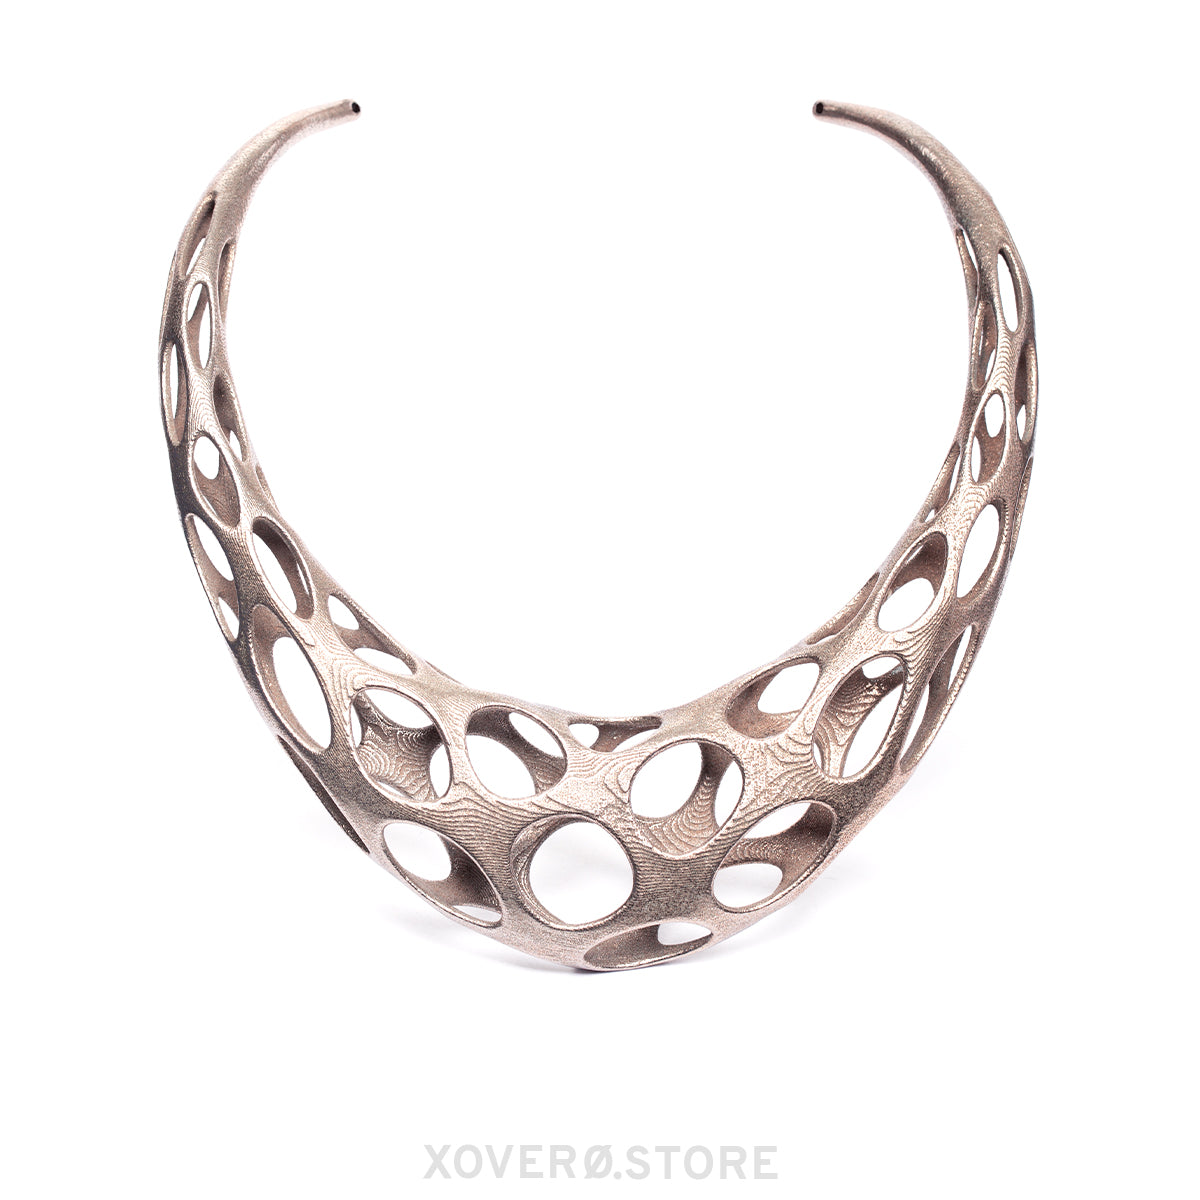 Expensive Necklaces Pack V1 3D Model Collection